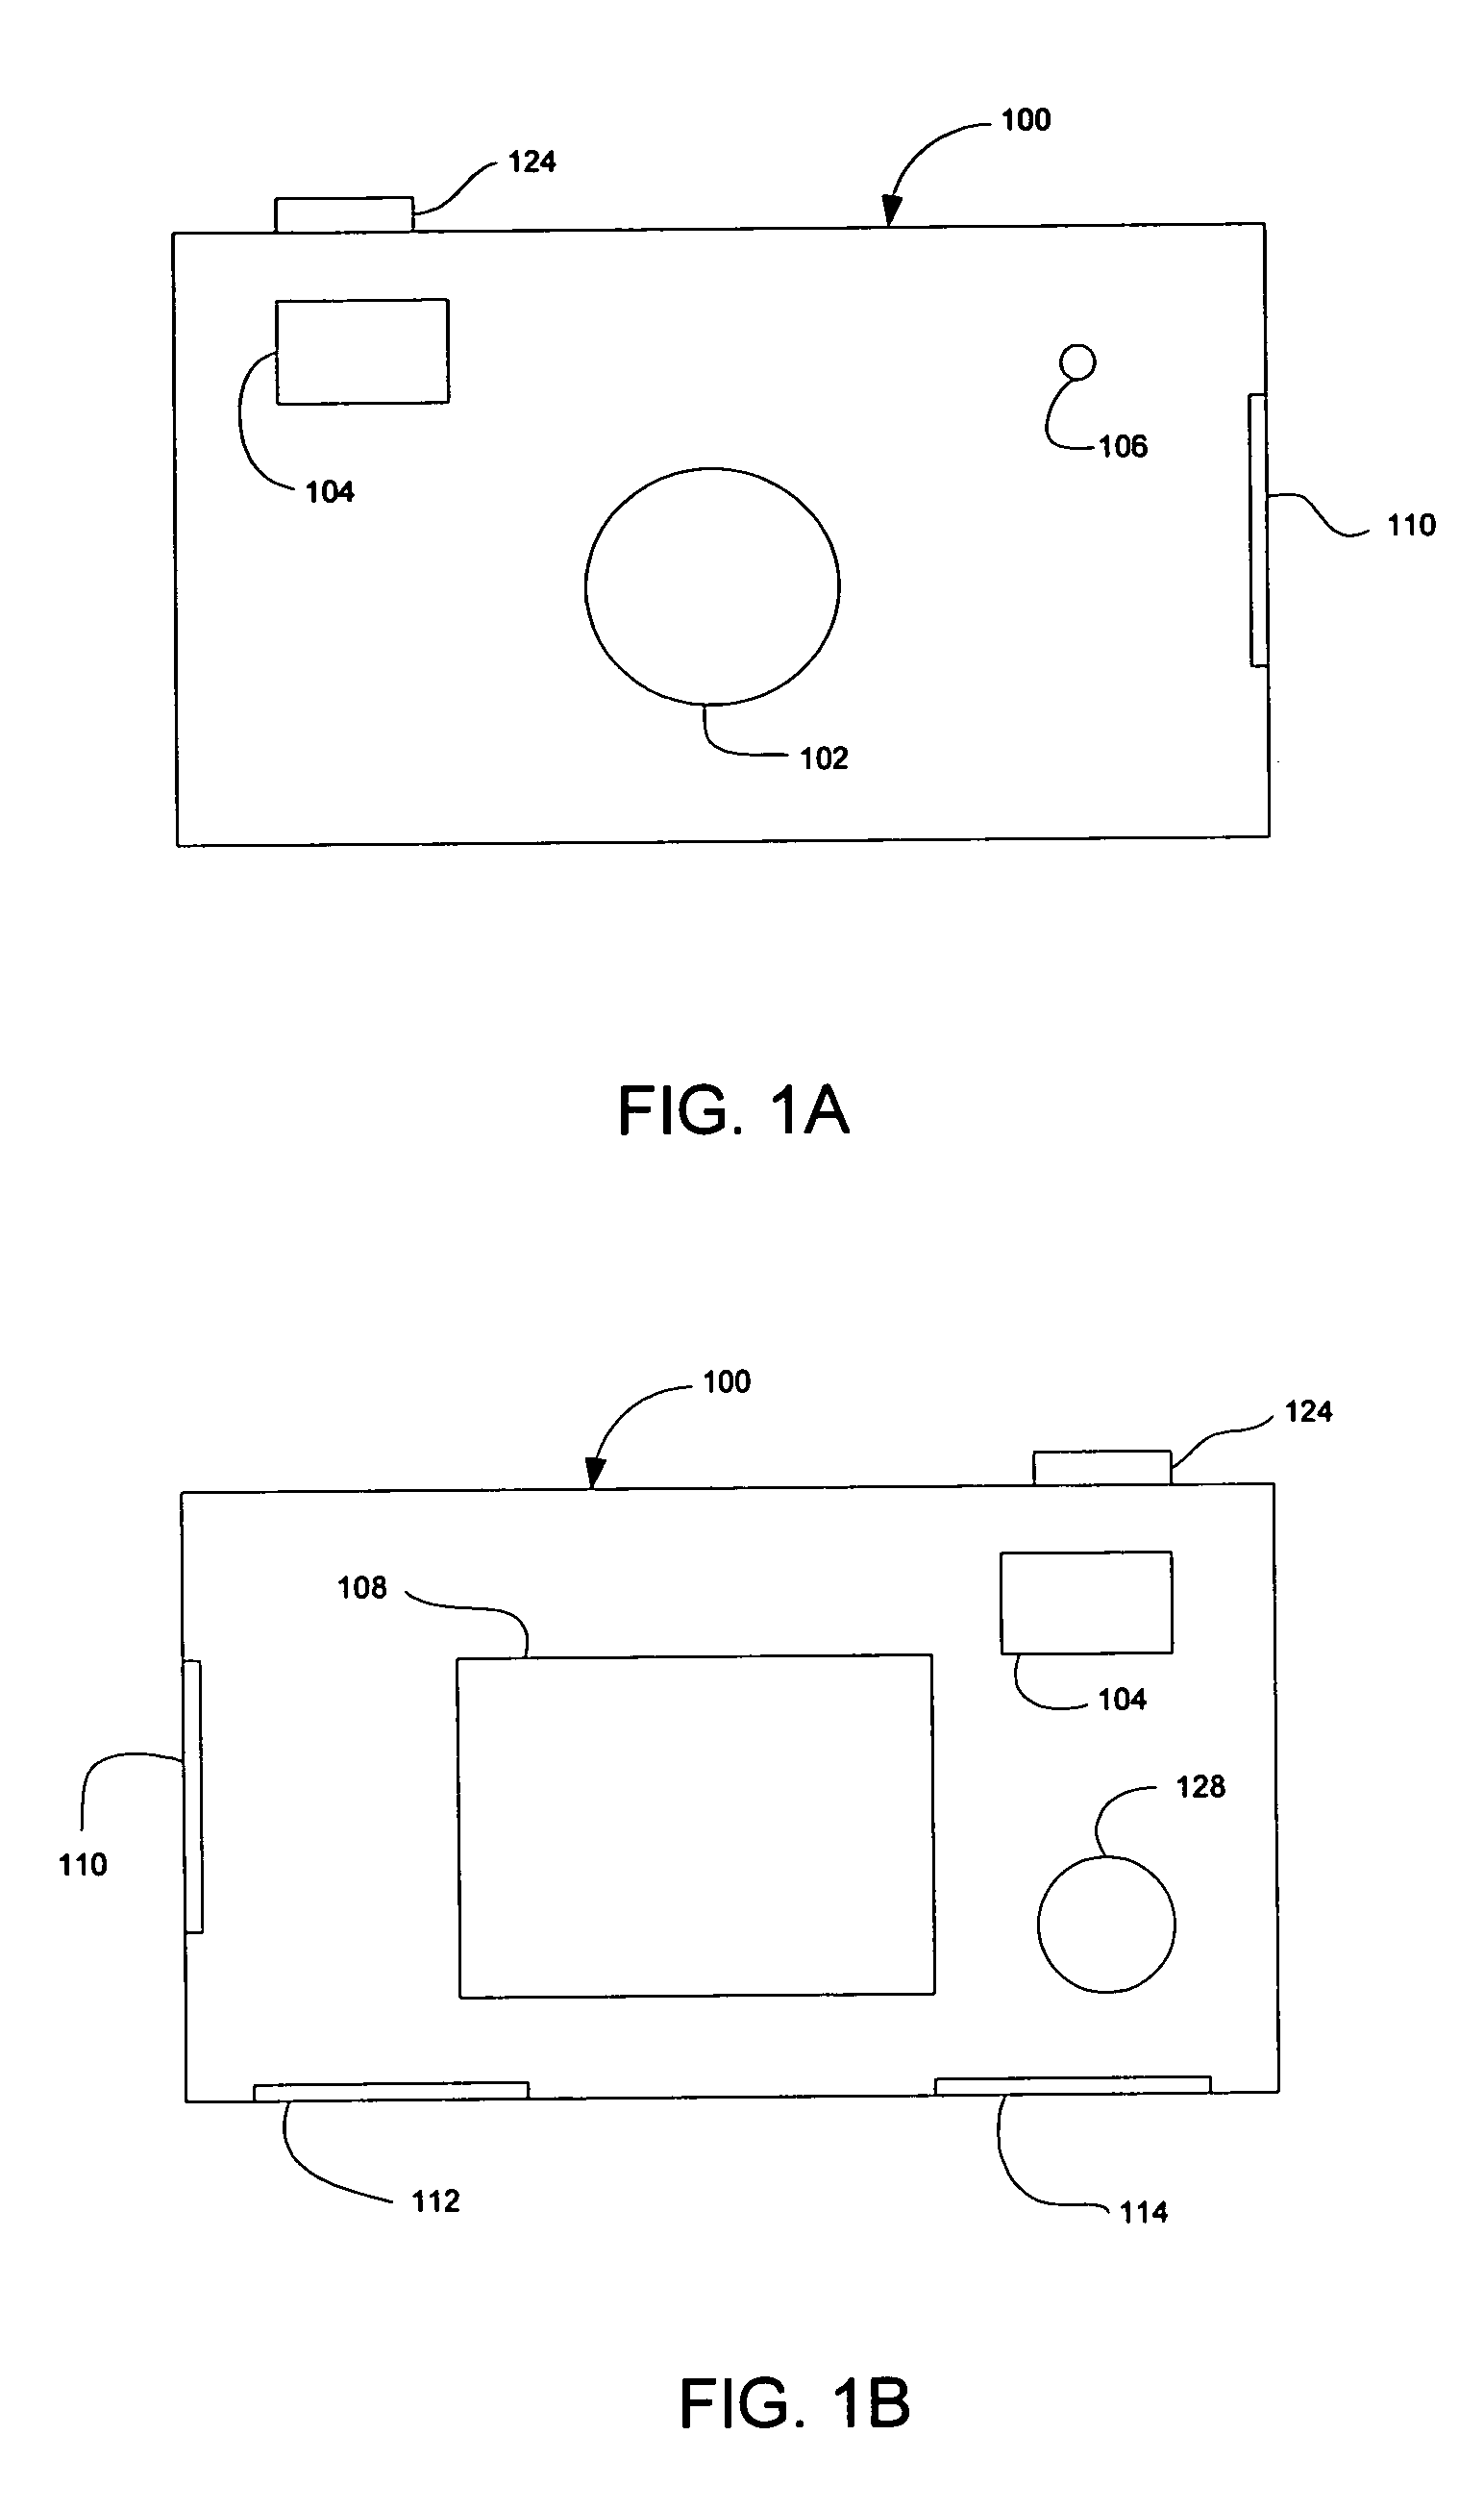 System and method for embedding and retrieving information in digital images and using the information to copyright the digital images